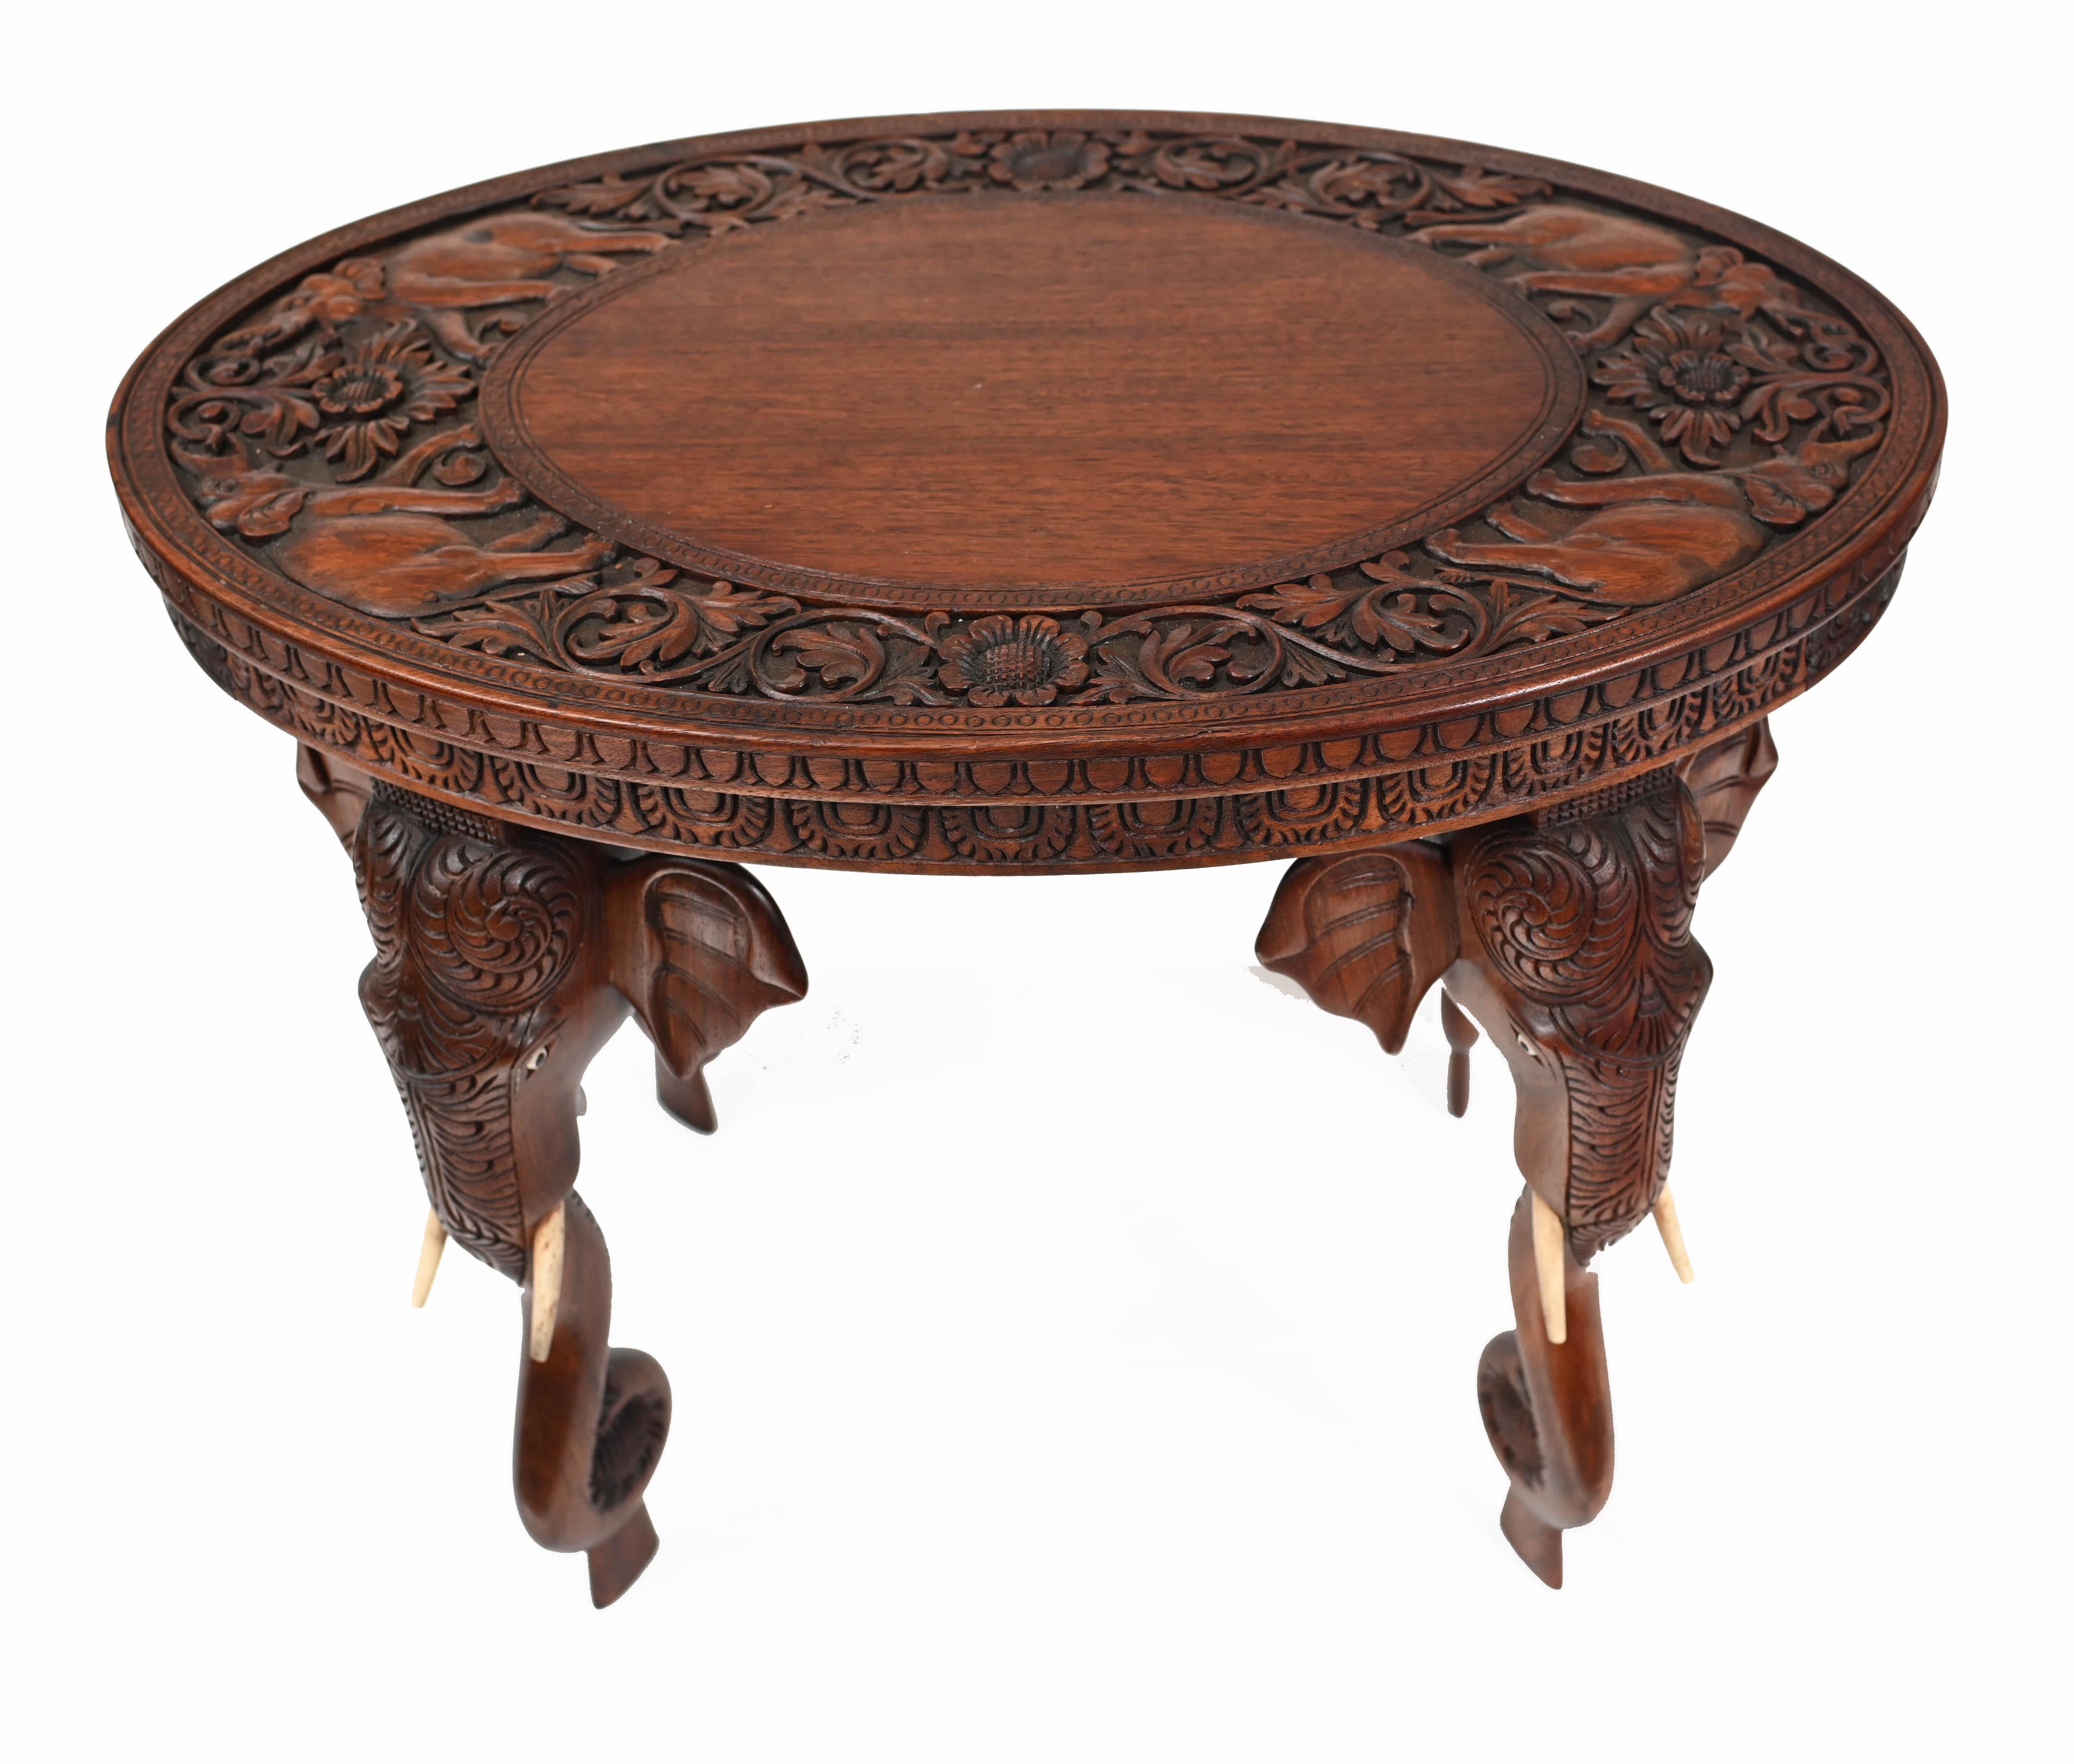 Gorgeous Burmese side table with hand carved elephant legs
Very distinctive look on this table we date to circa 1890
Offered in great shape ready for home use right away
We ship to every corner of the planet.
 